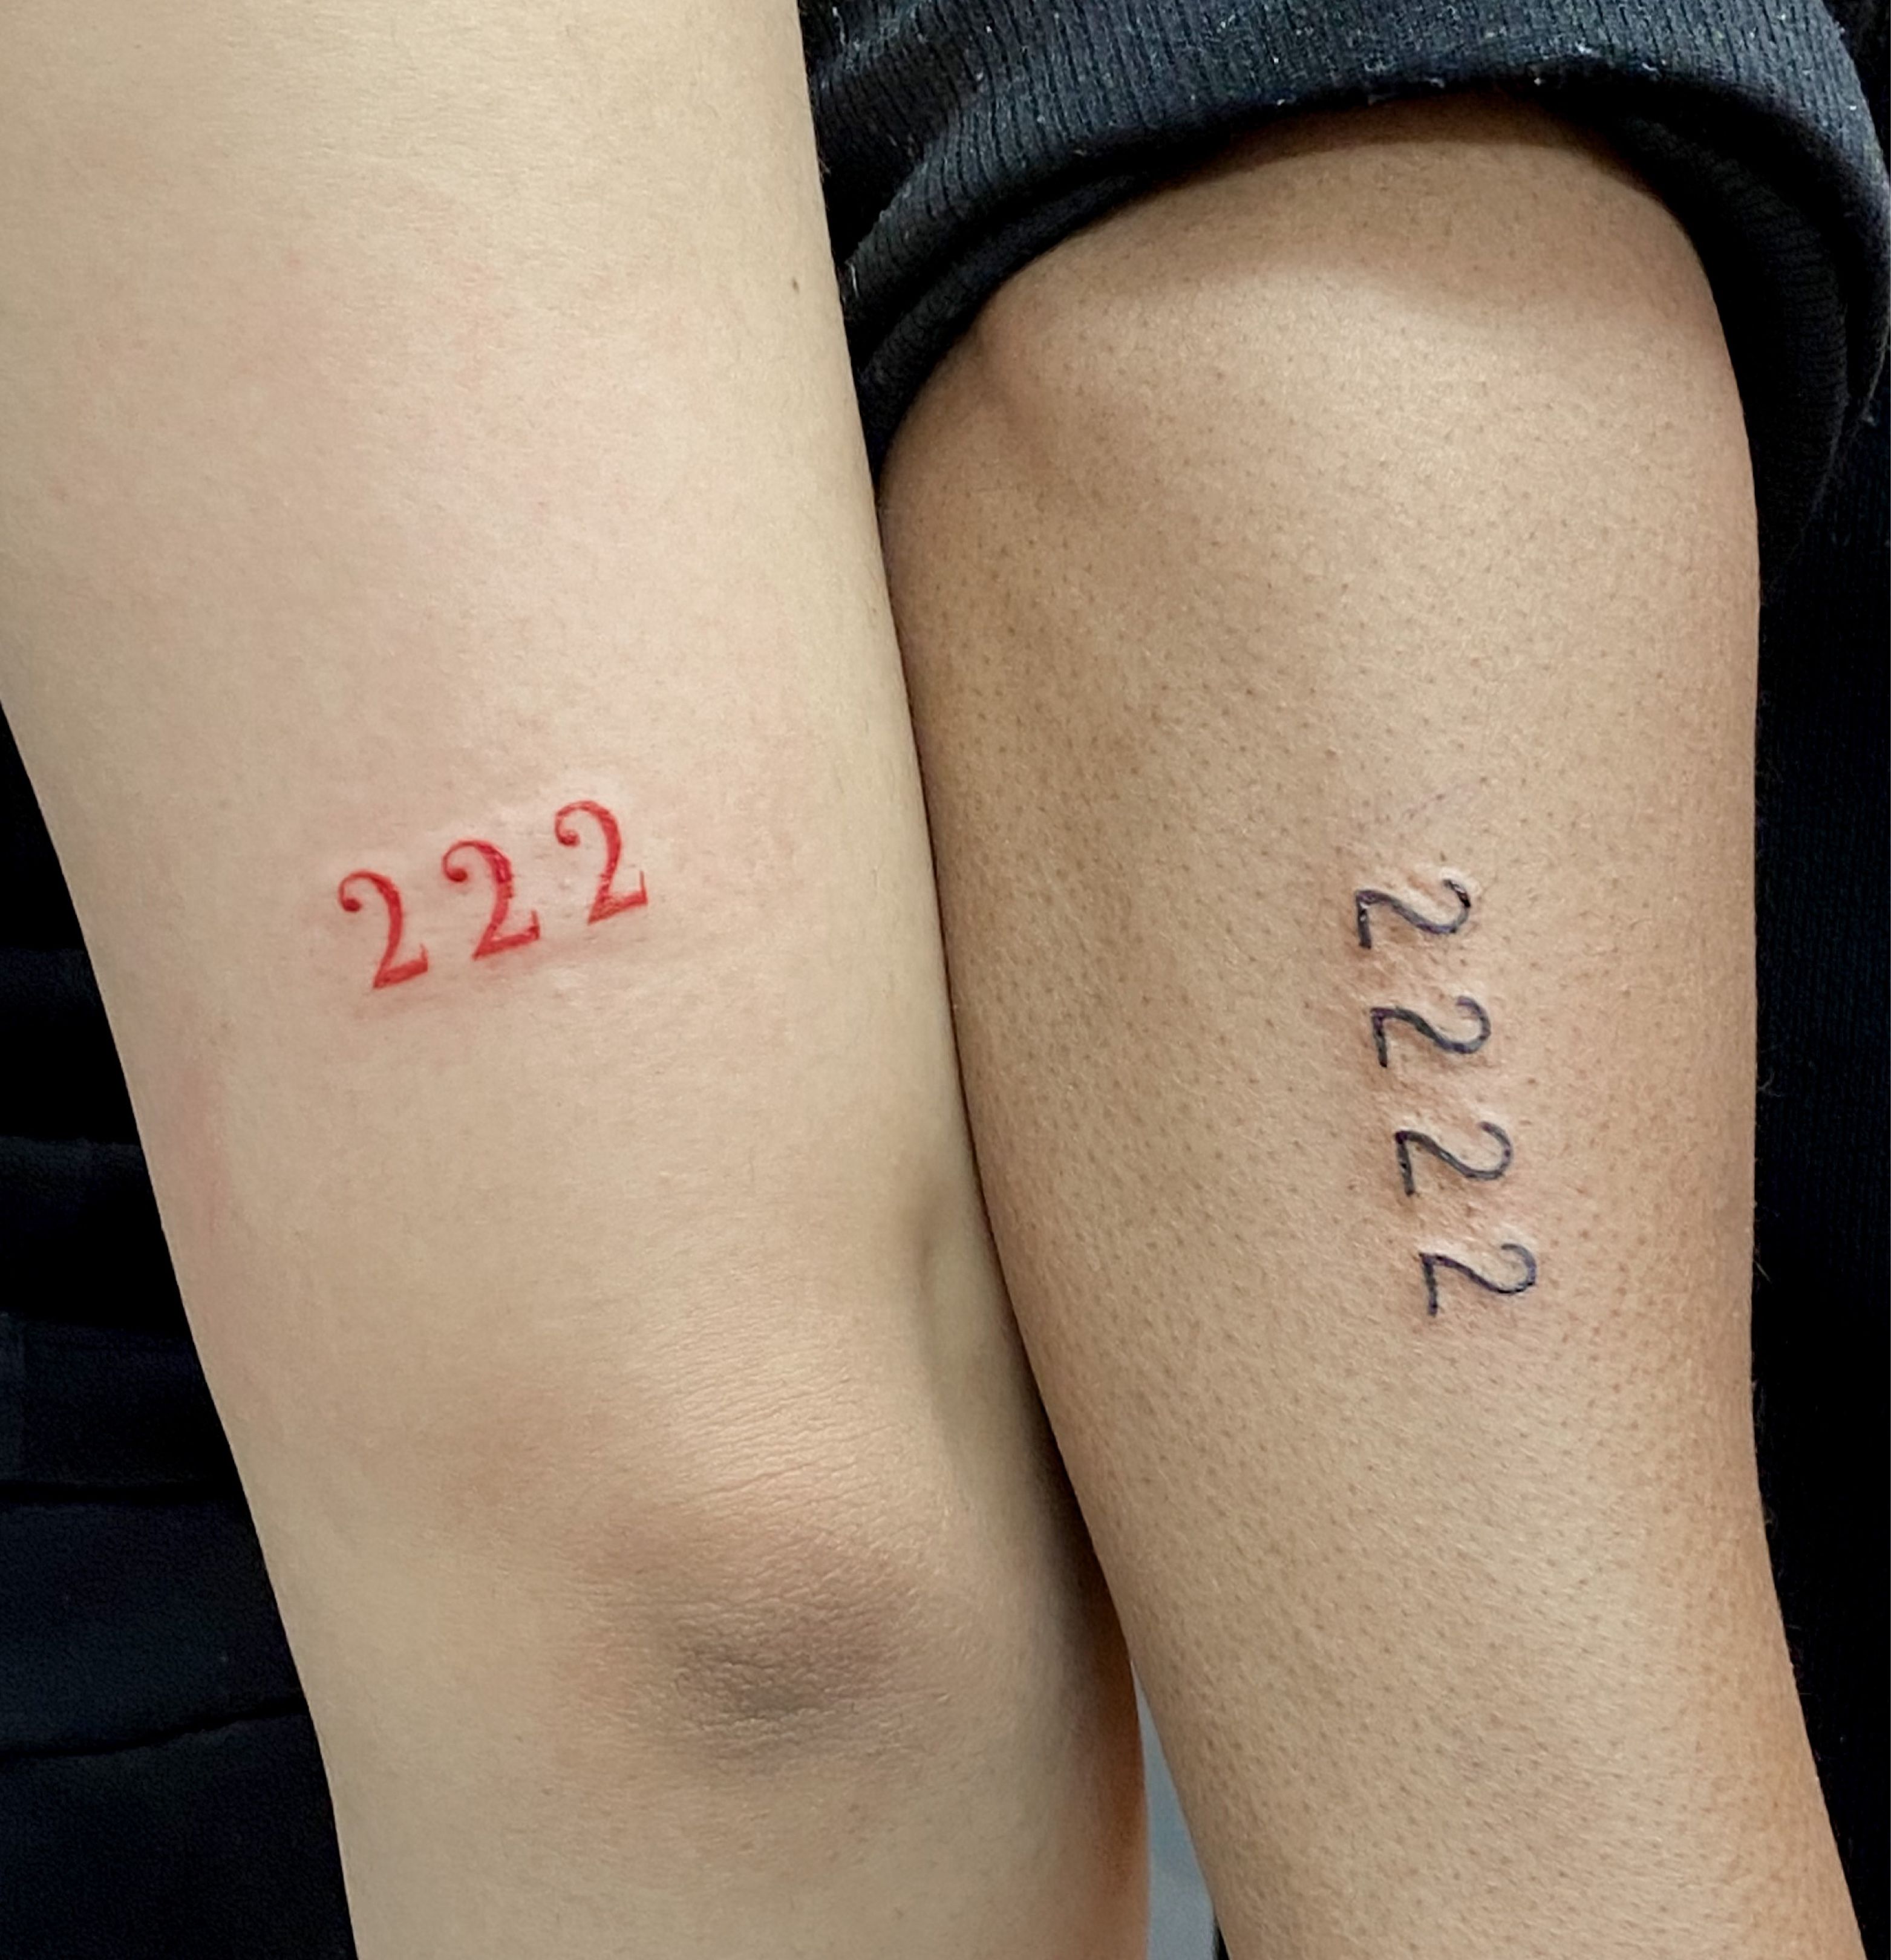 Details more than 81 222 angel number tattoo  thtantai2